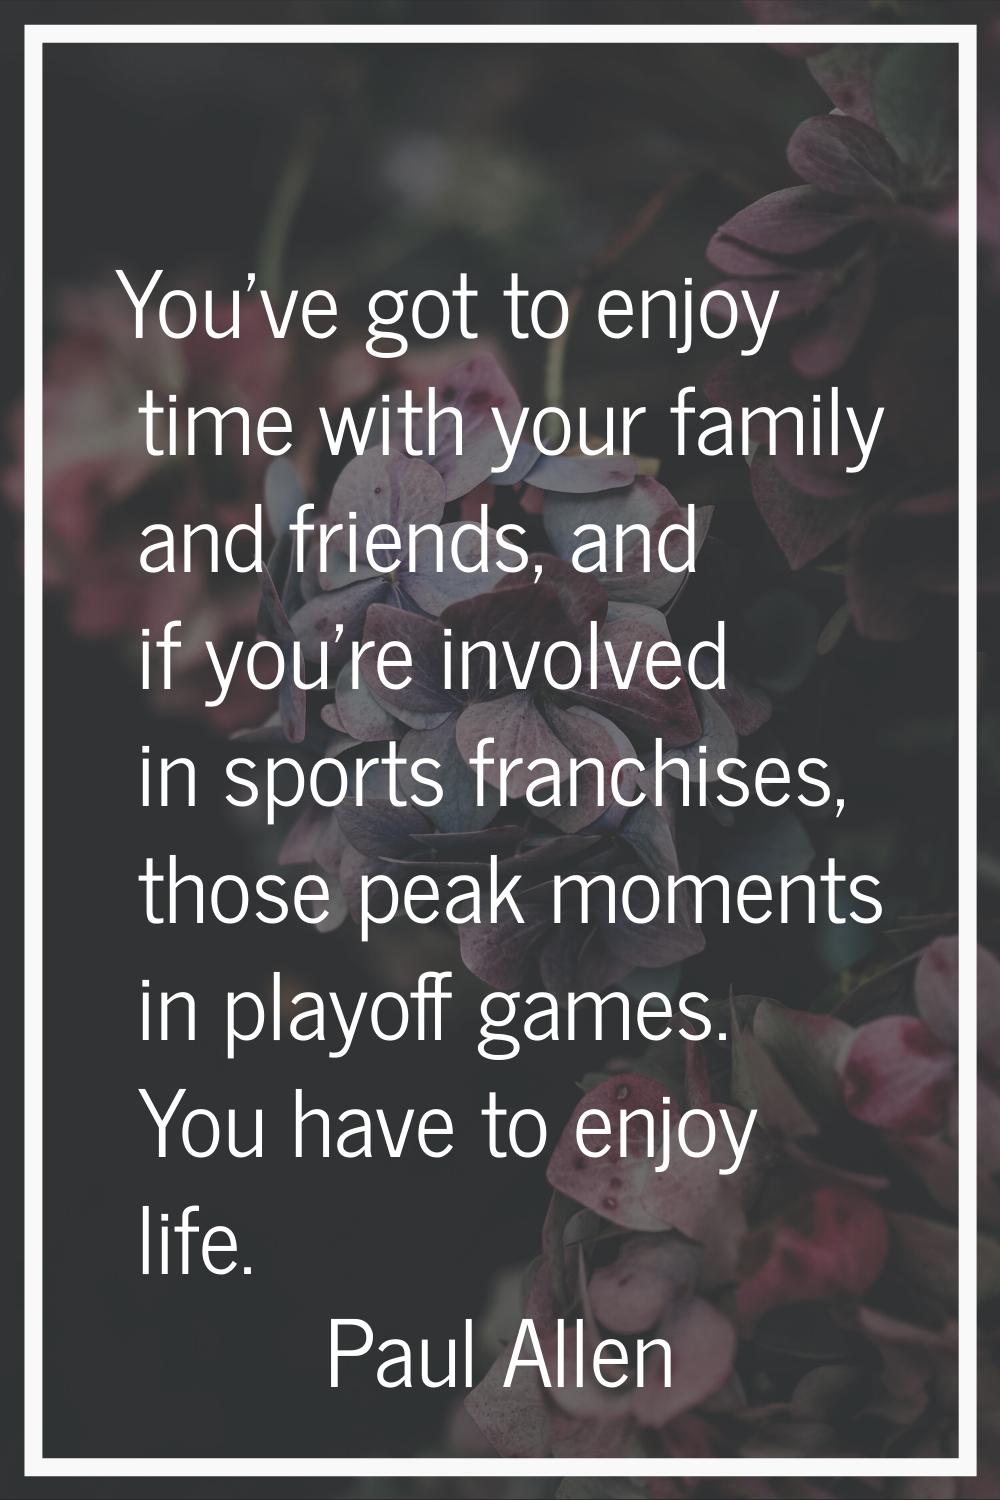 You've got to enjoy time with your family and friends, and if you're involved in sports franchises,